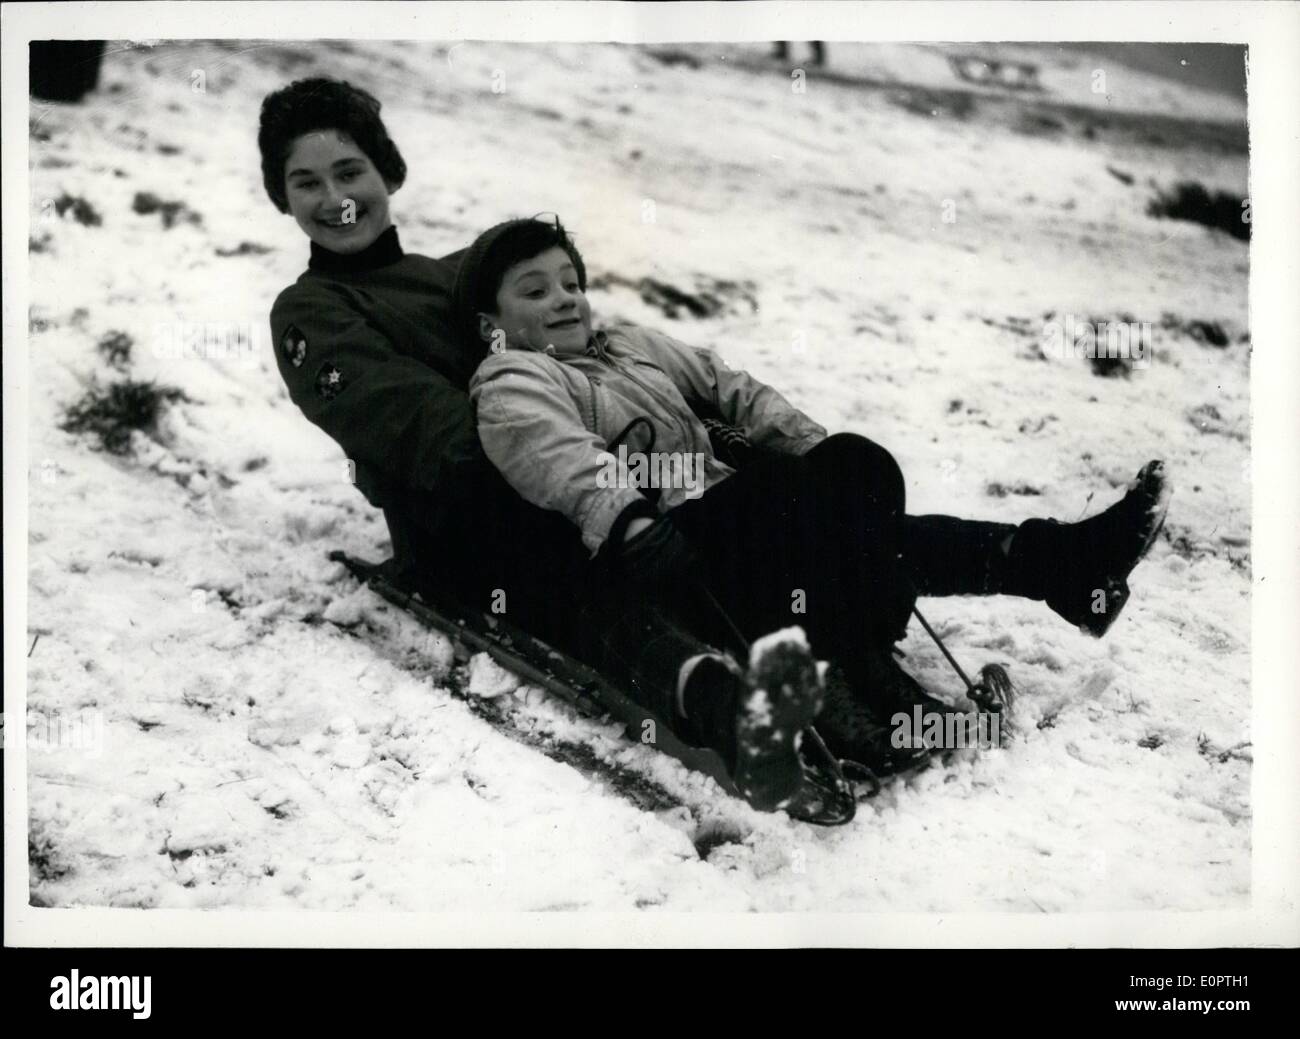 Dec. 12, 1956 - Snow Comes To London And Brings Out The Winter Sports Enthusiasts At Hampstead. Photo shows 8-year-old Richard and 17-year-old Nina Holland, of Handon, are in high spirits on their toboggan at Hampstead Heath today. Stock Photo